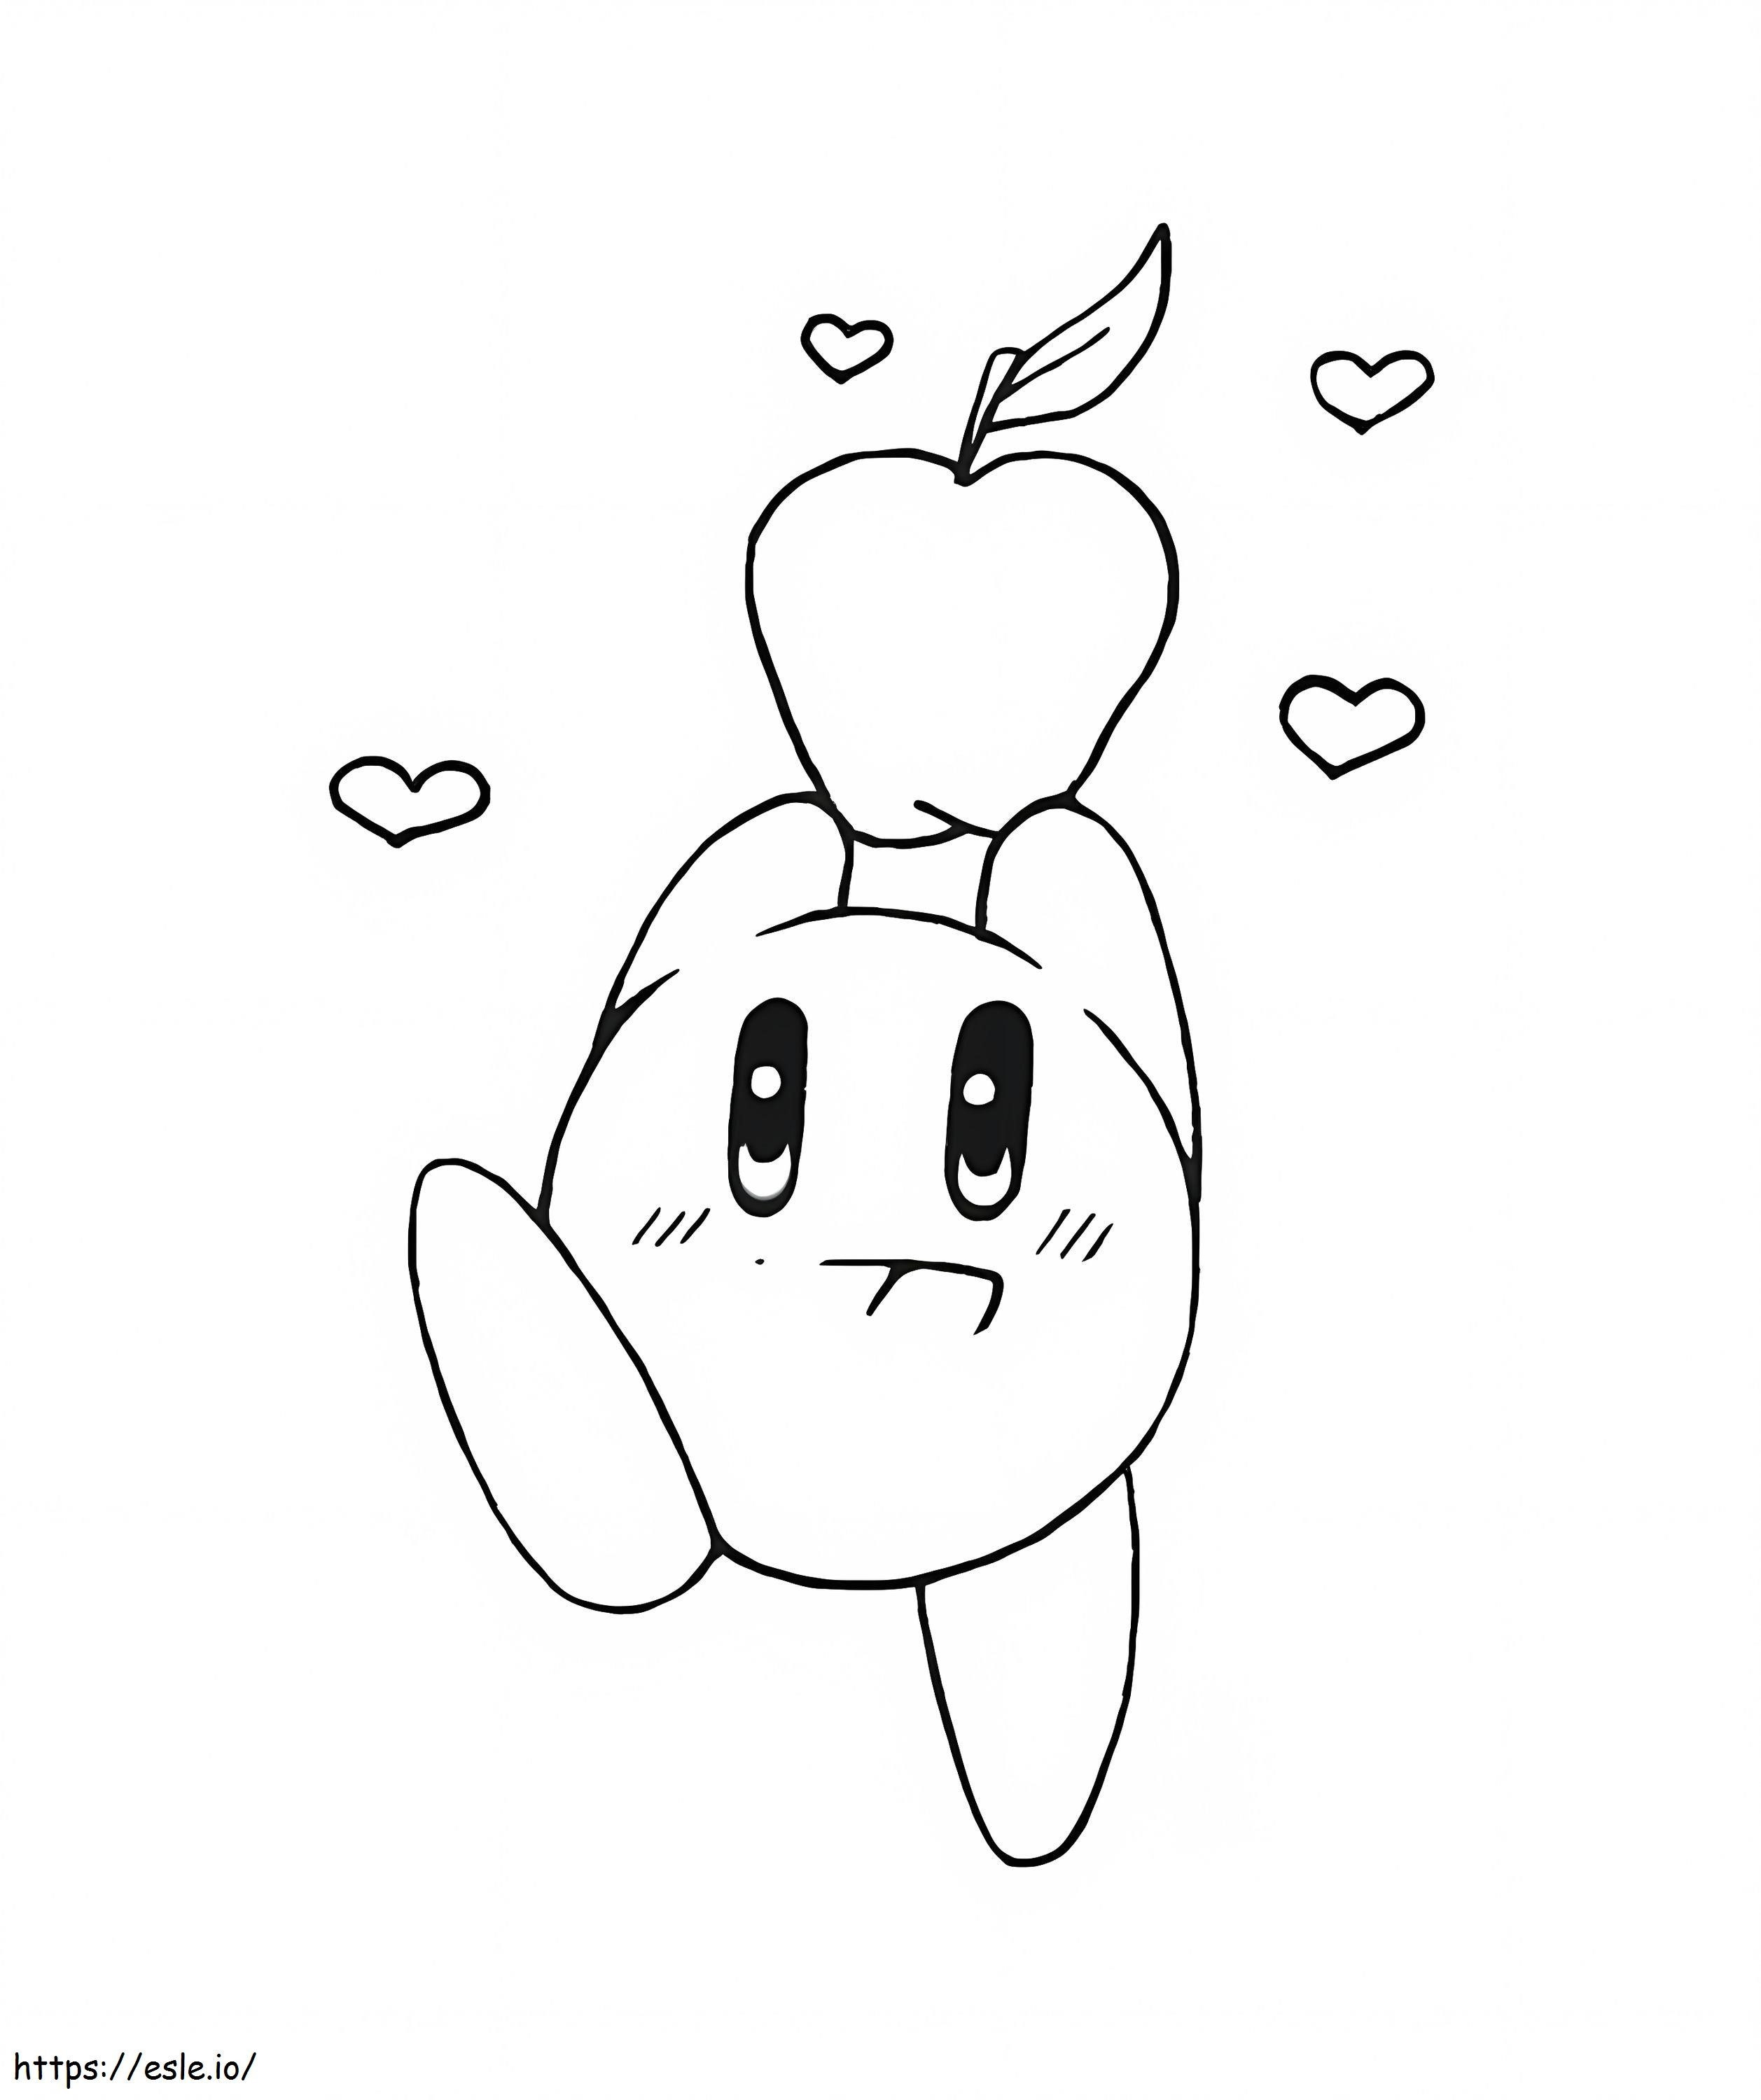 Kirby With An Apple coloring page